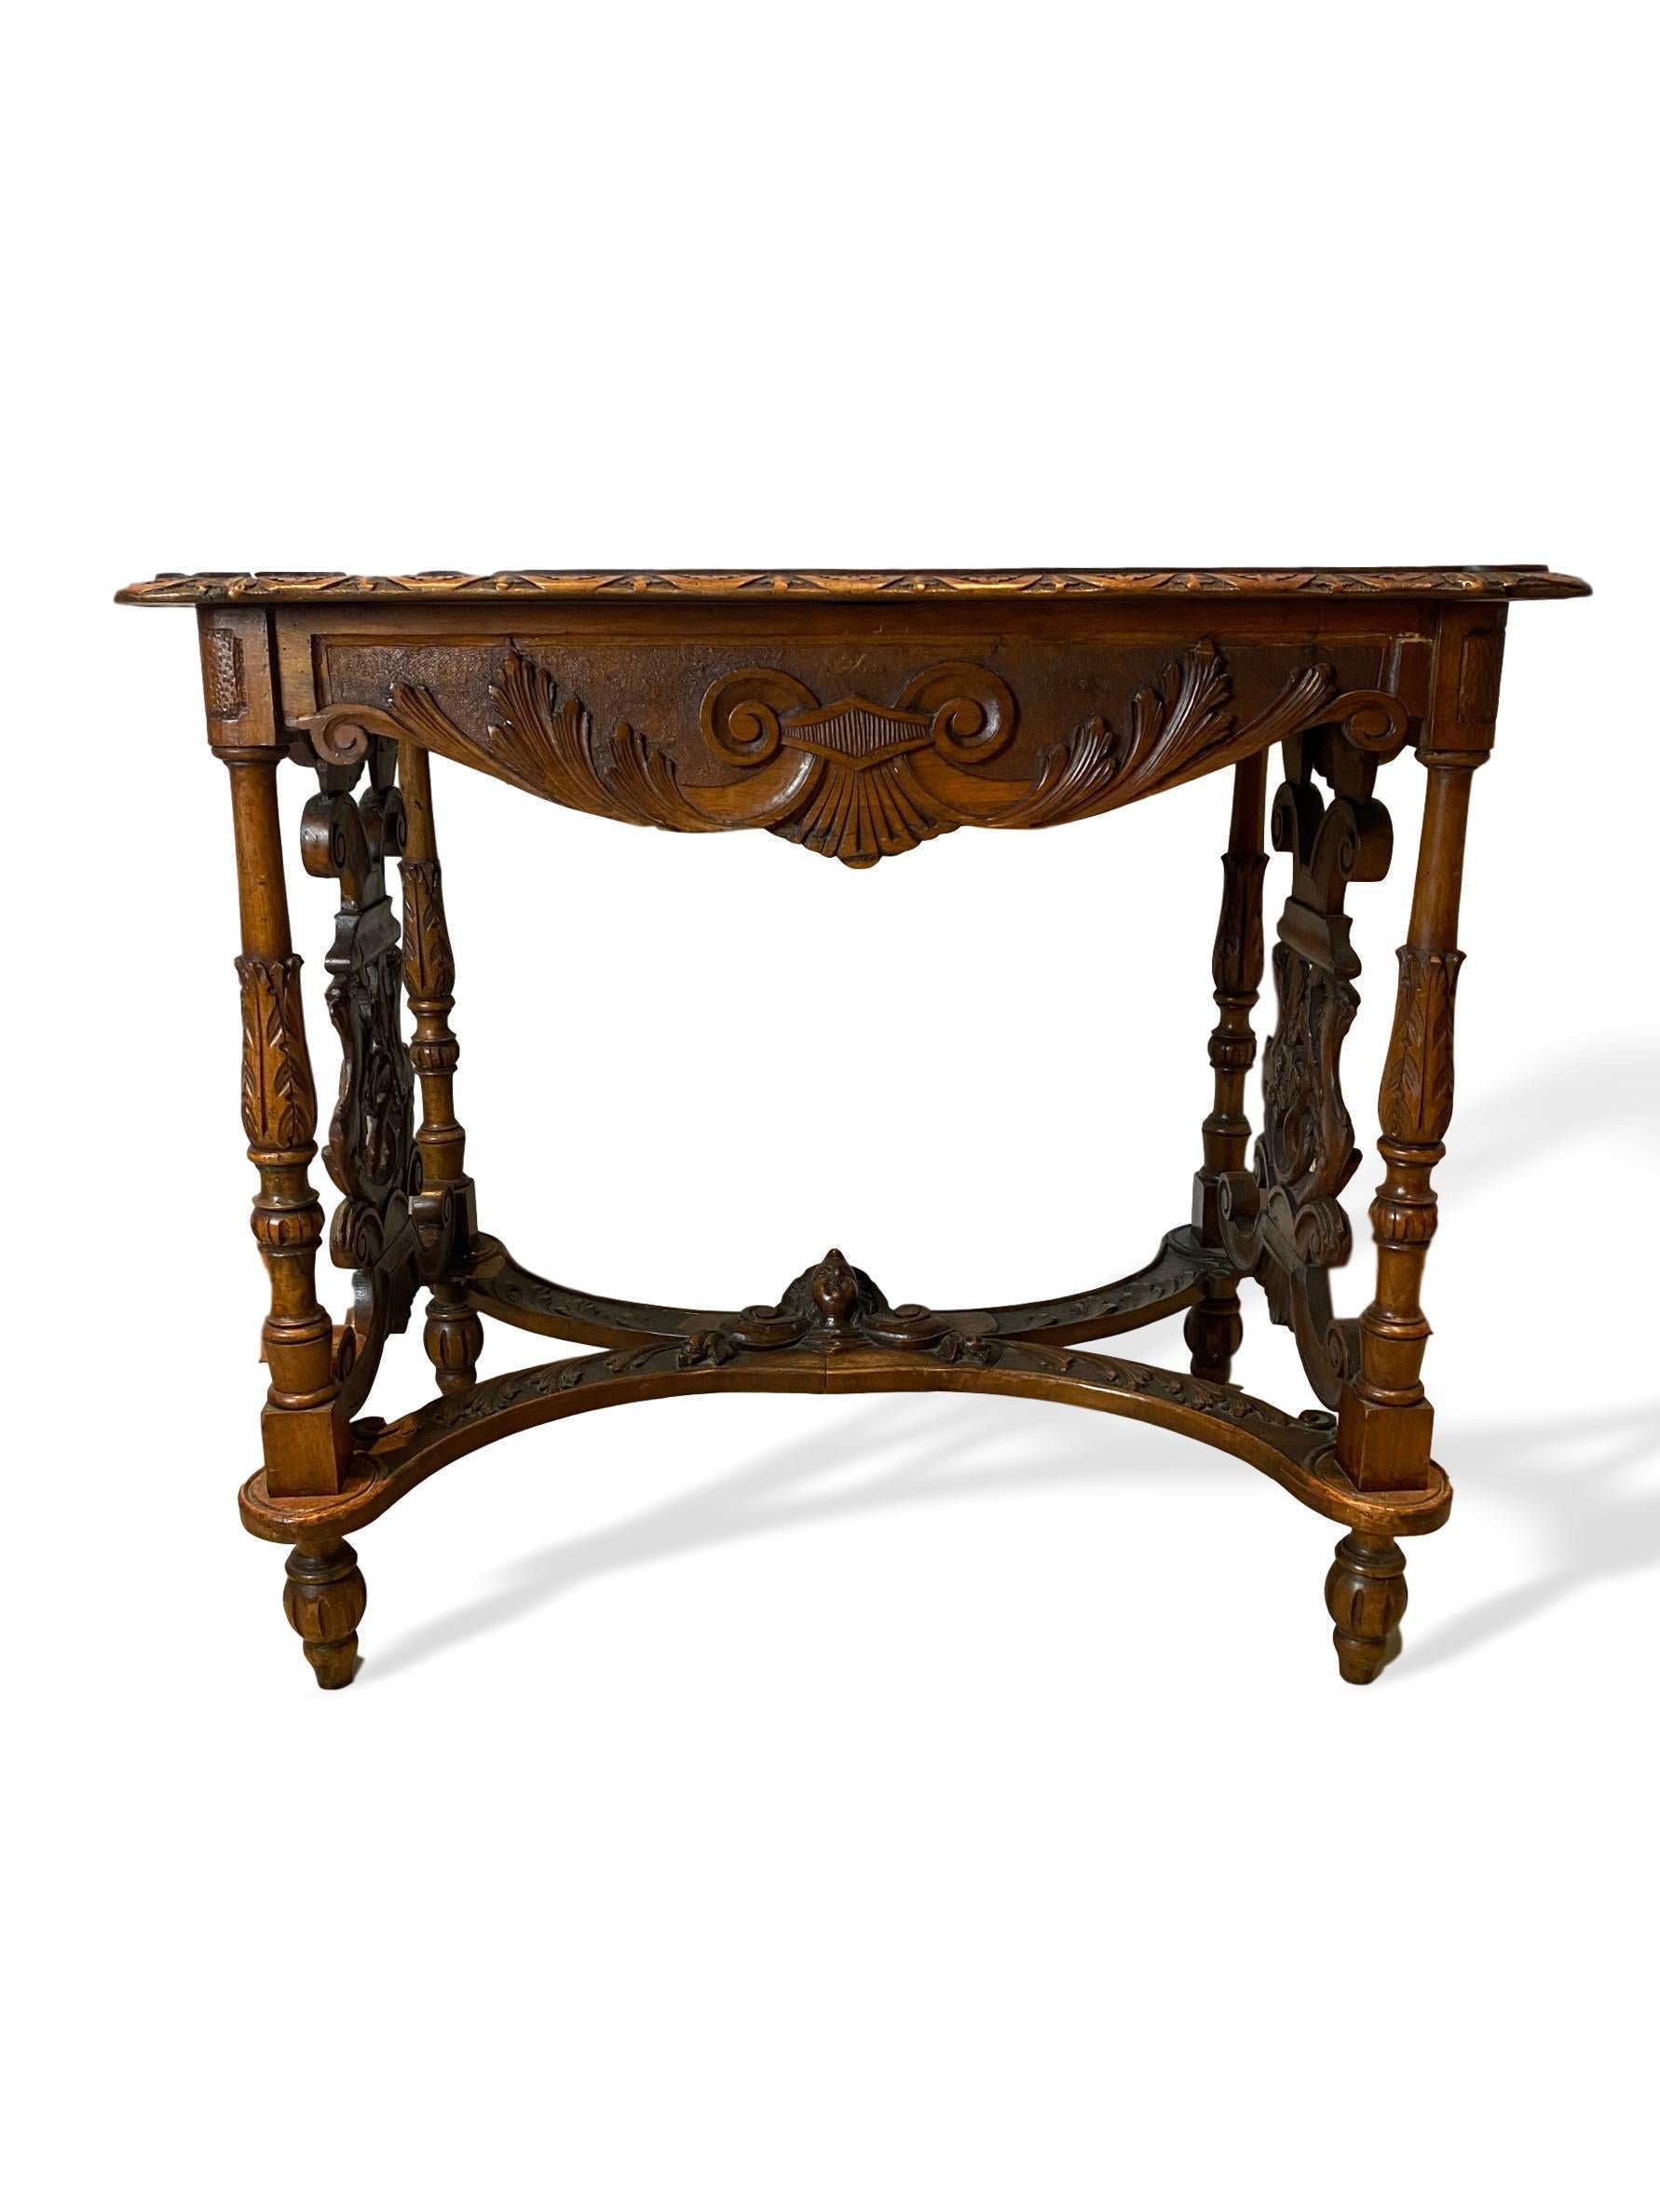 Hand carved walnut center table, Italian, circa 1880, profusely hand carved, the shaped top carved with a central motif of a sunflower, with sunflower edging, above a classically carved apron, the posts carved with stylized acanthus leaves, the